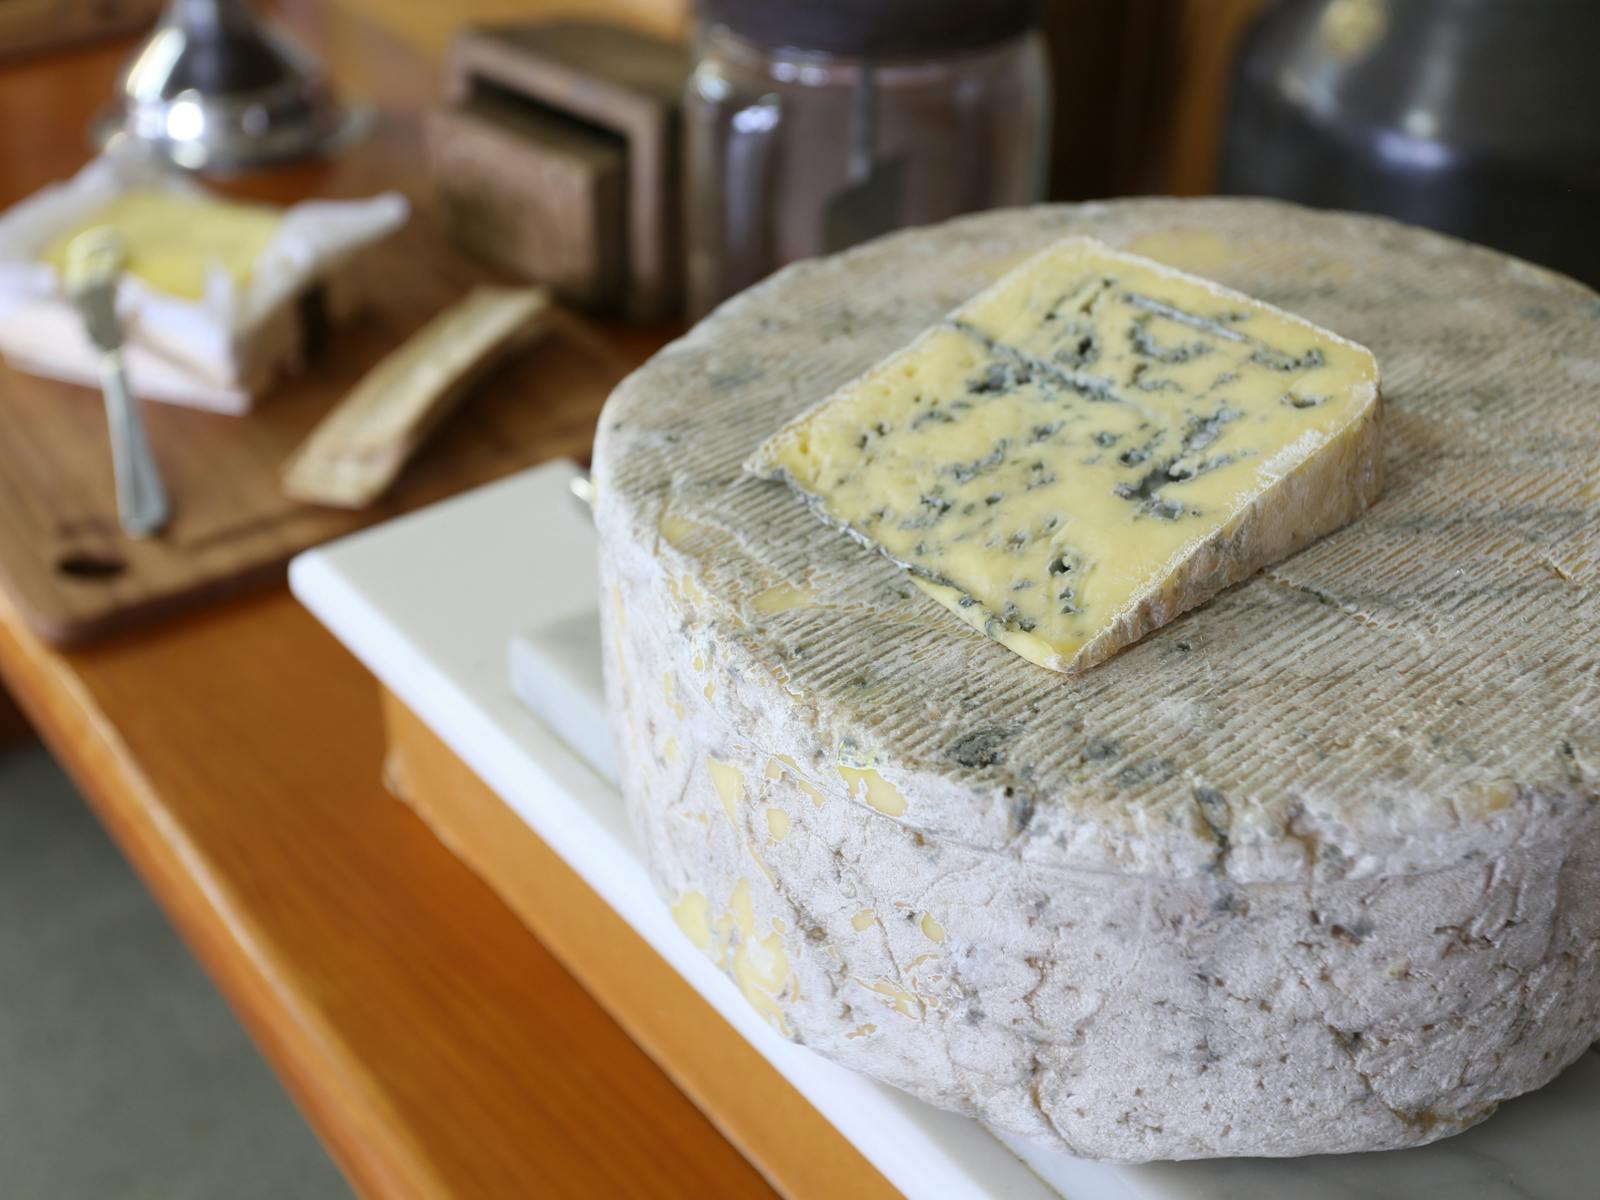 Sample one of the many cheeses at Ashgrove Cheese